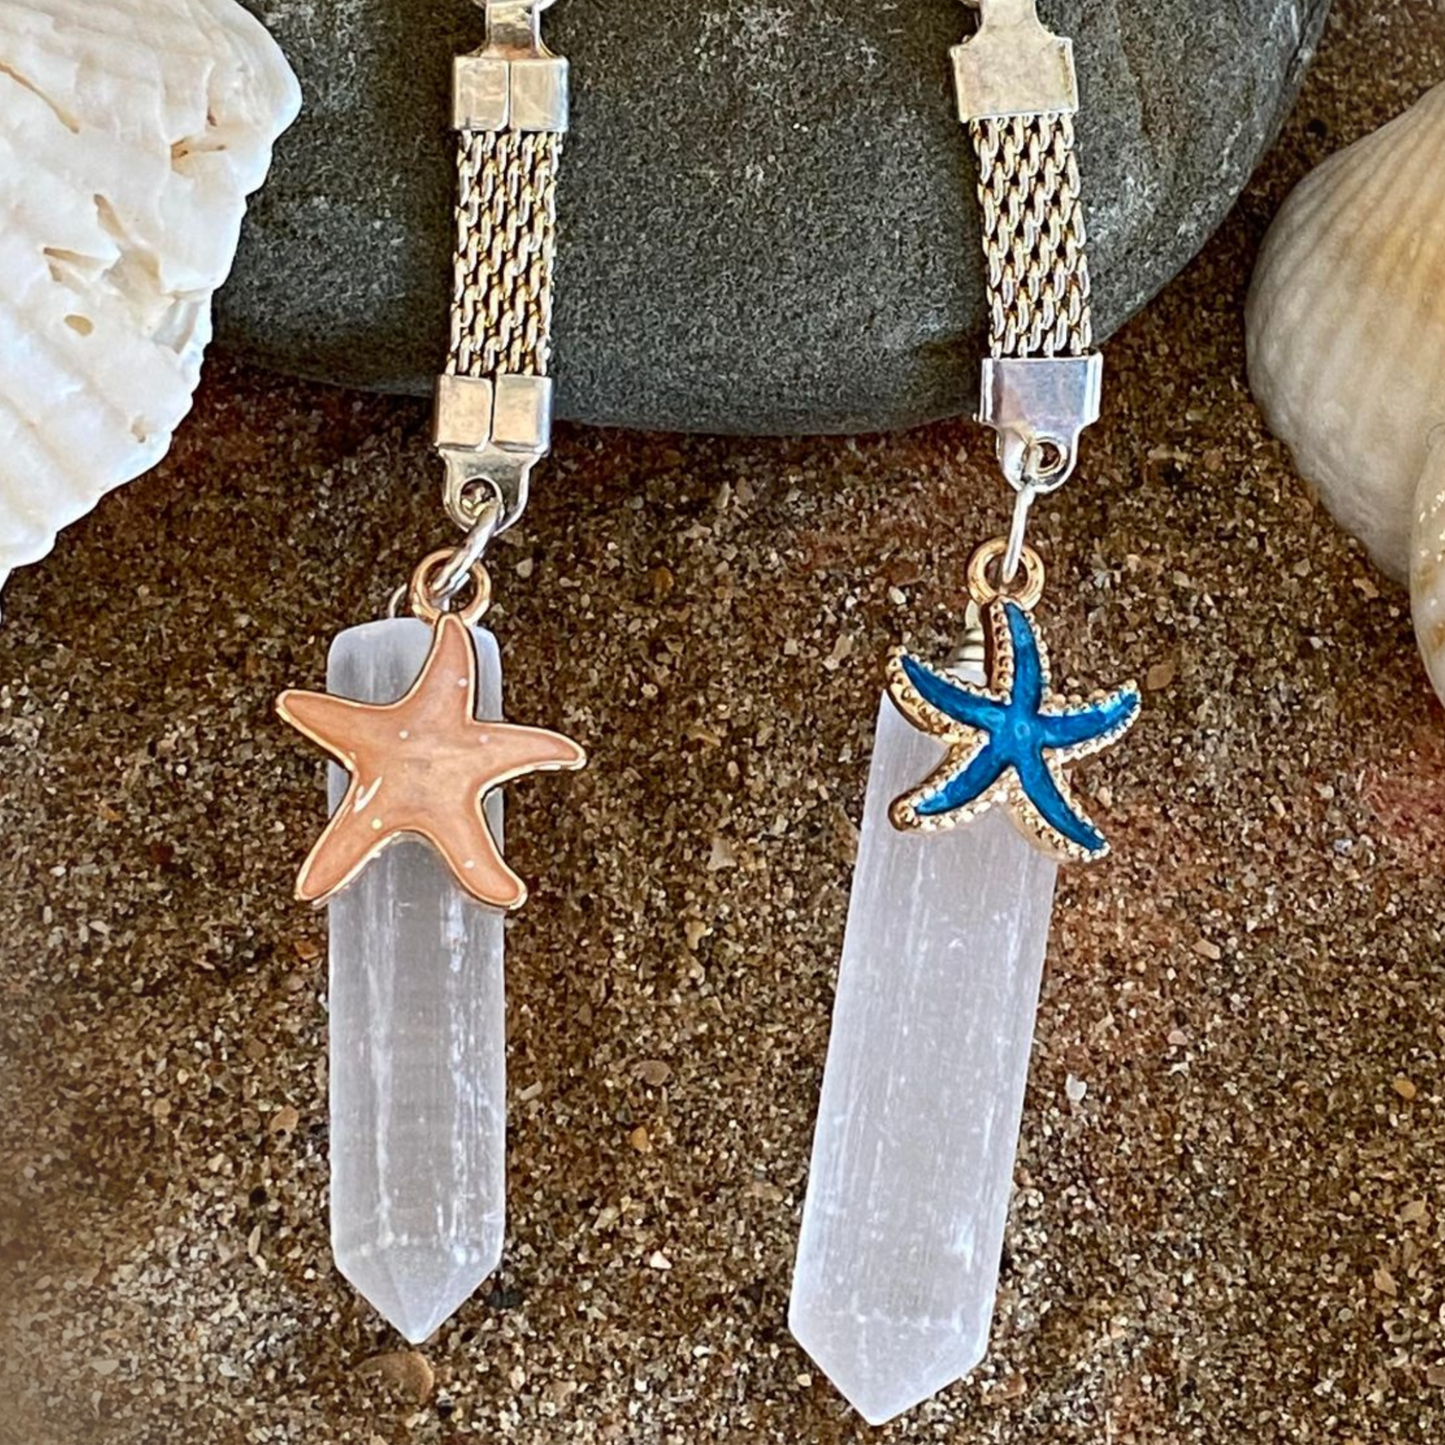 Selenite Key Rings with Apricot or Blue Starfish Charms